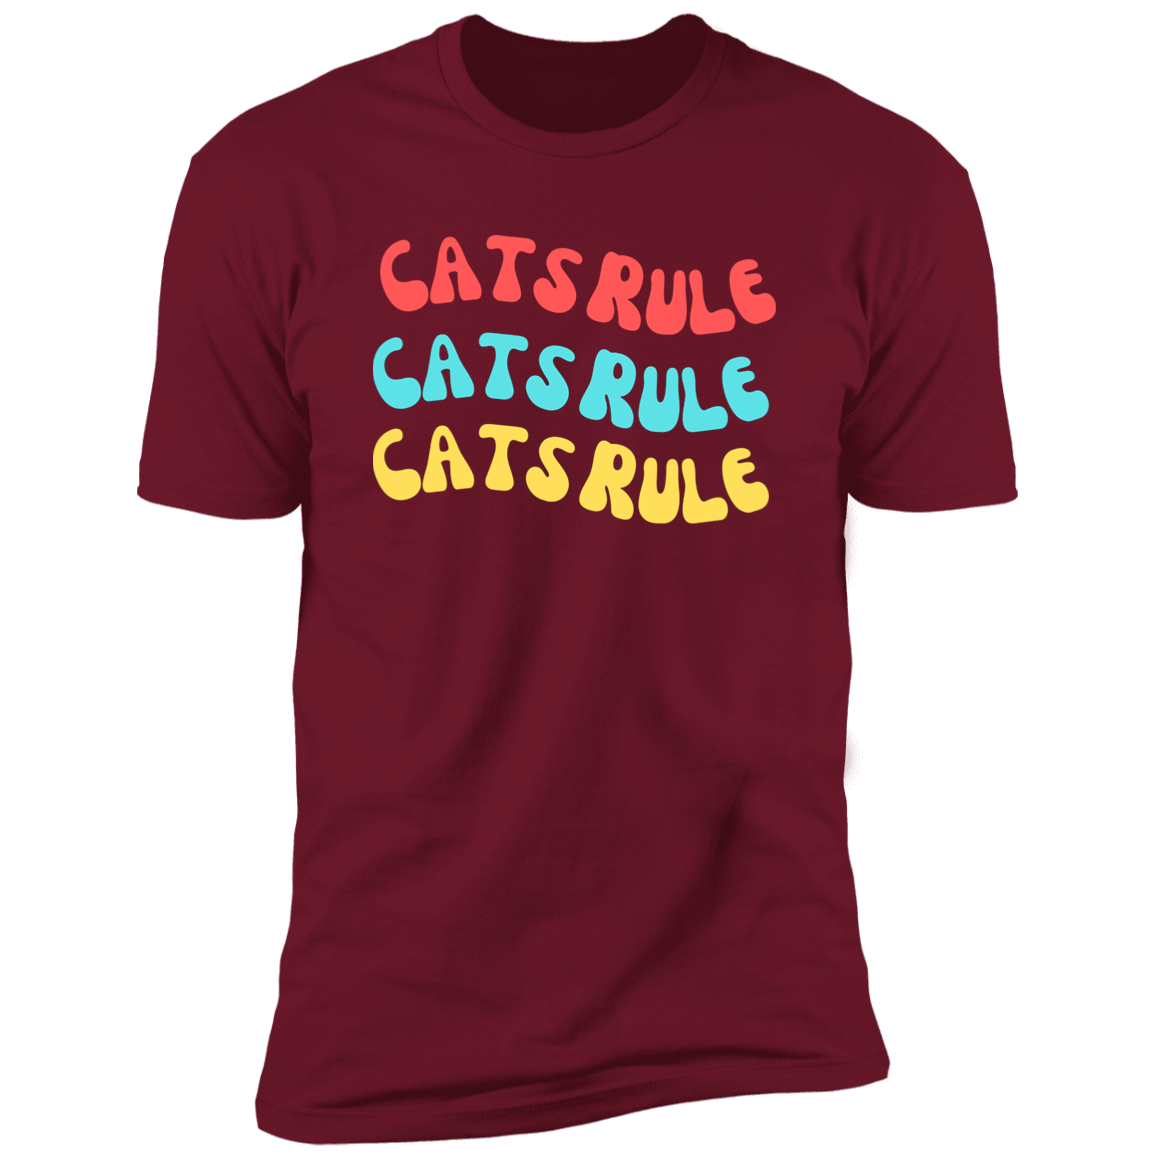 Cats Rule T-shirt, Cat Shirt for humans, in cardinal red